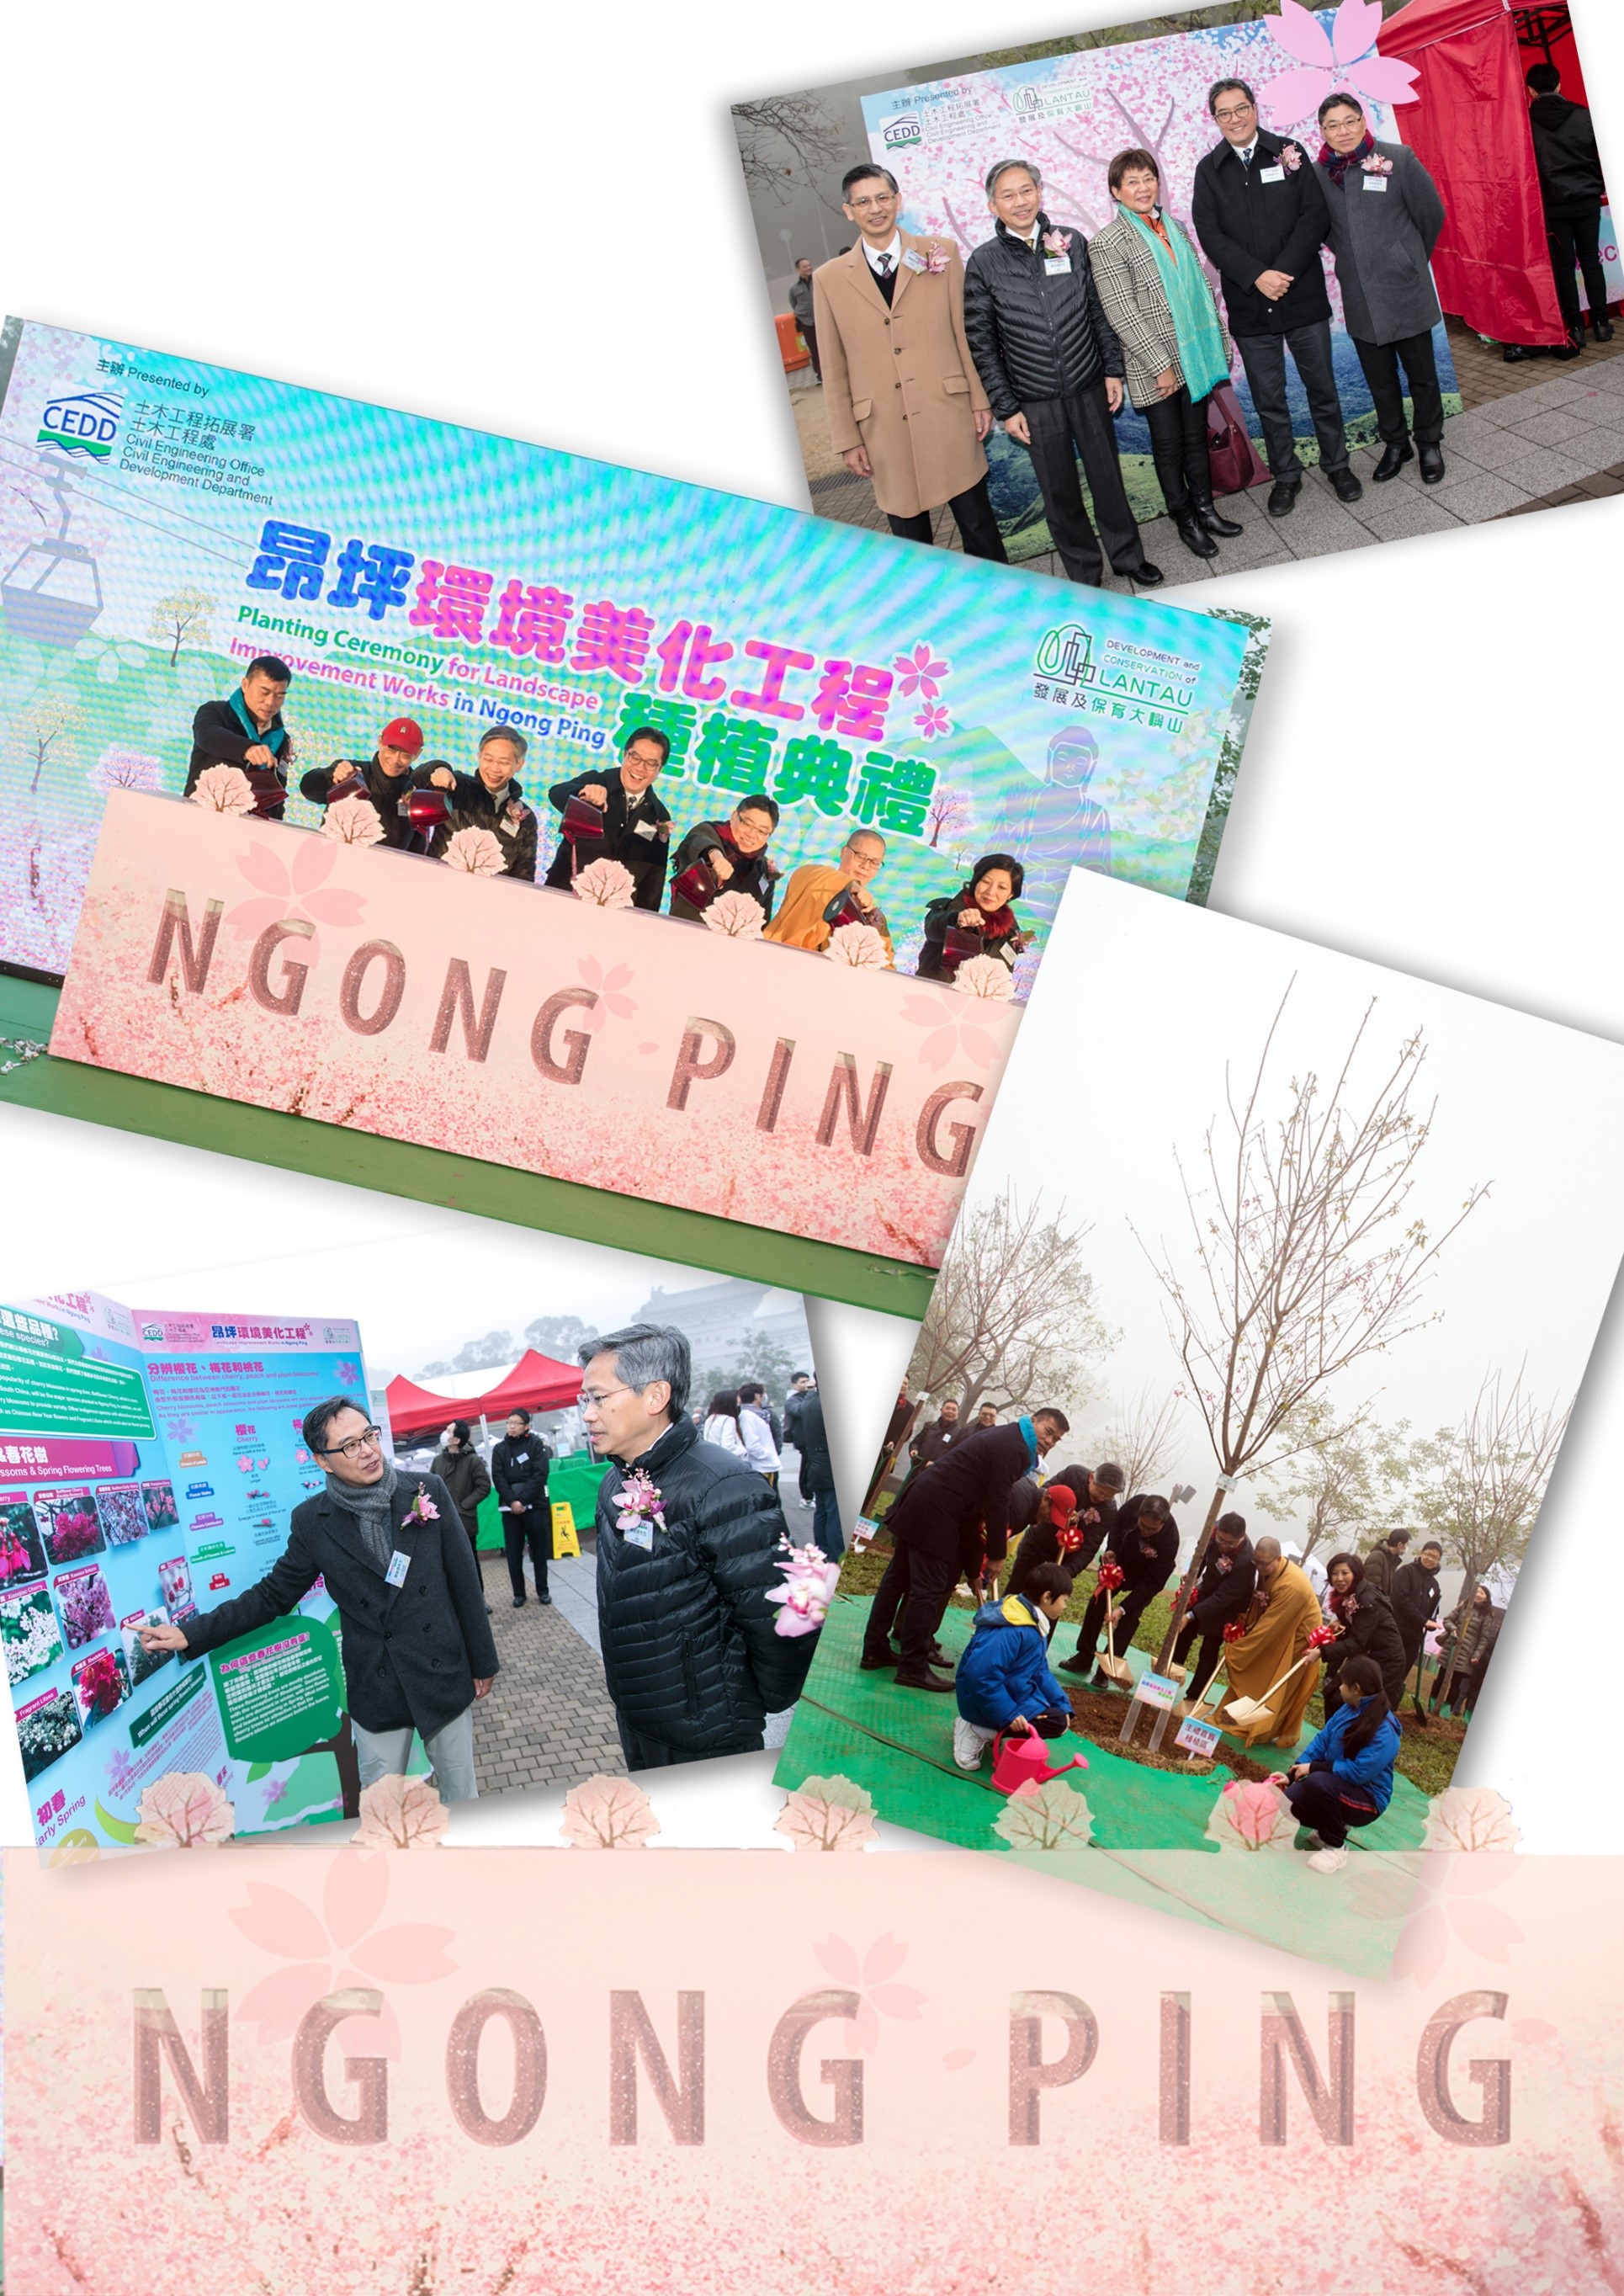 Landscape Improvement Works in Ngong Ping Planting Ceremony